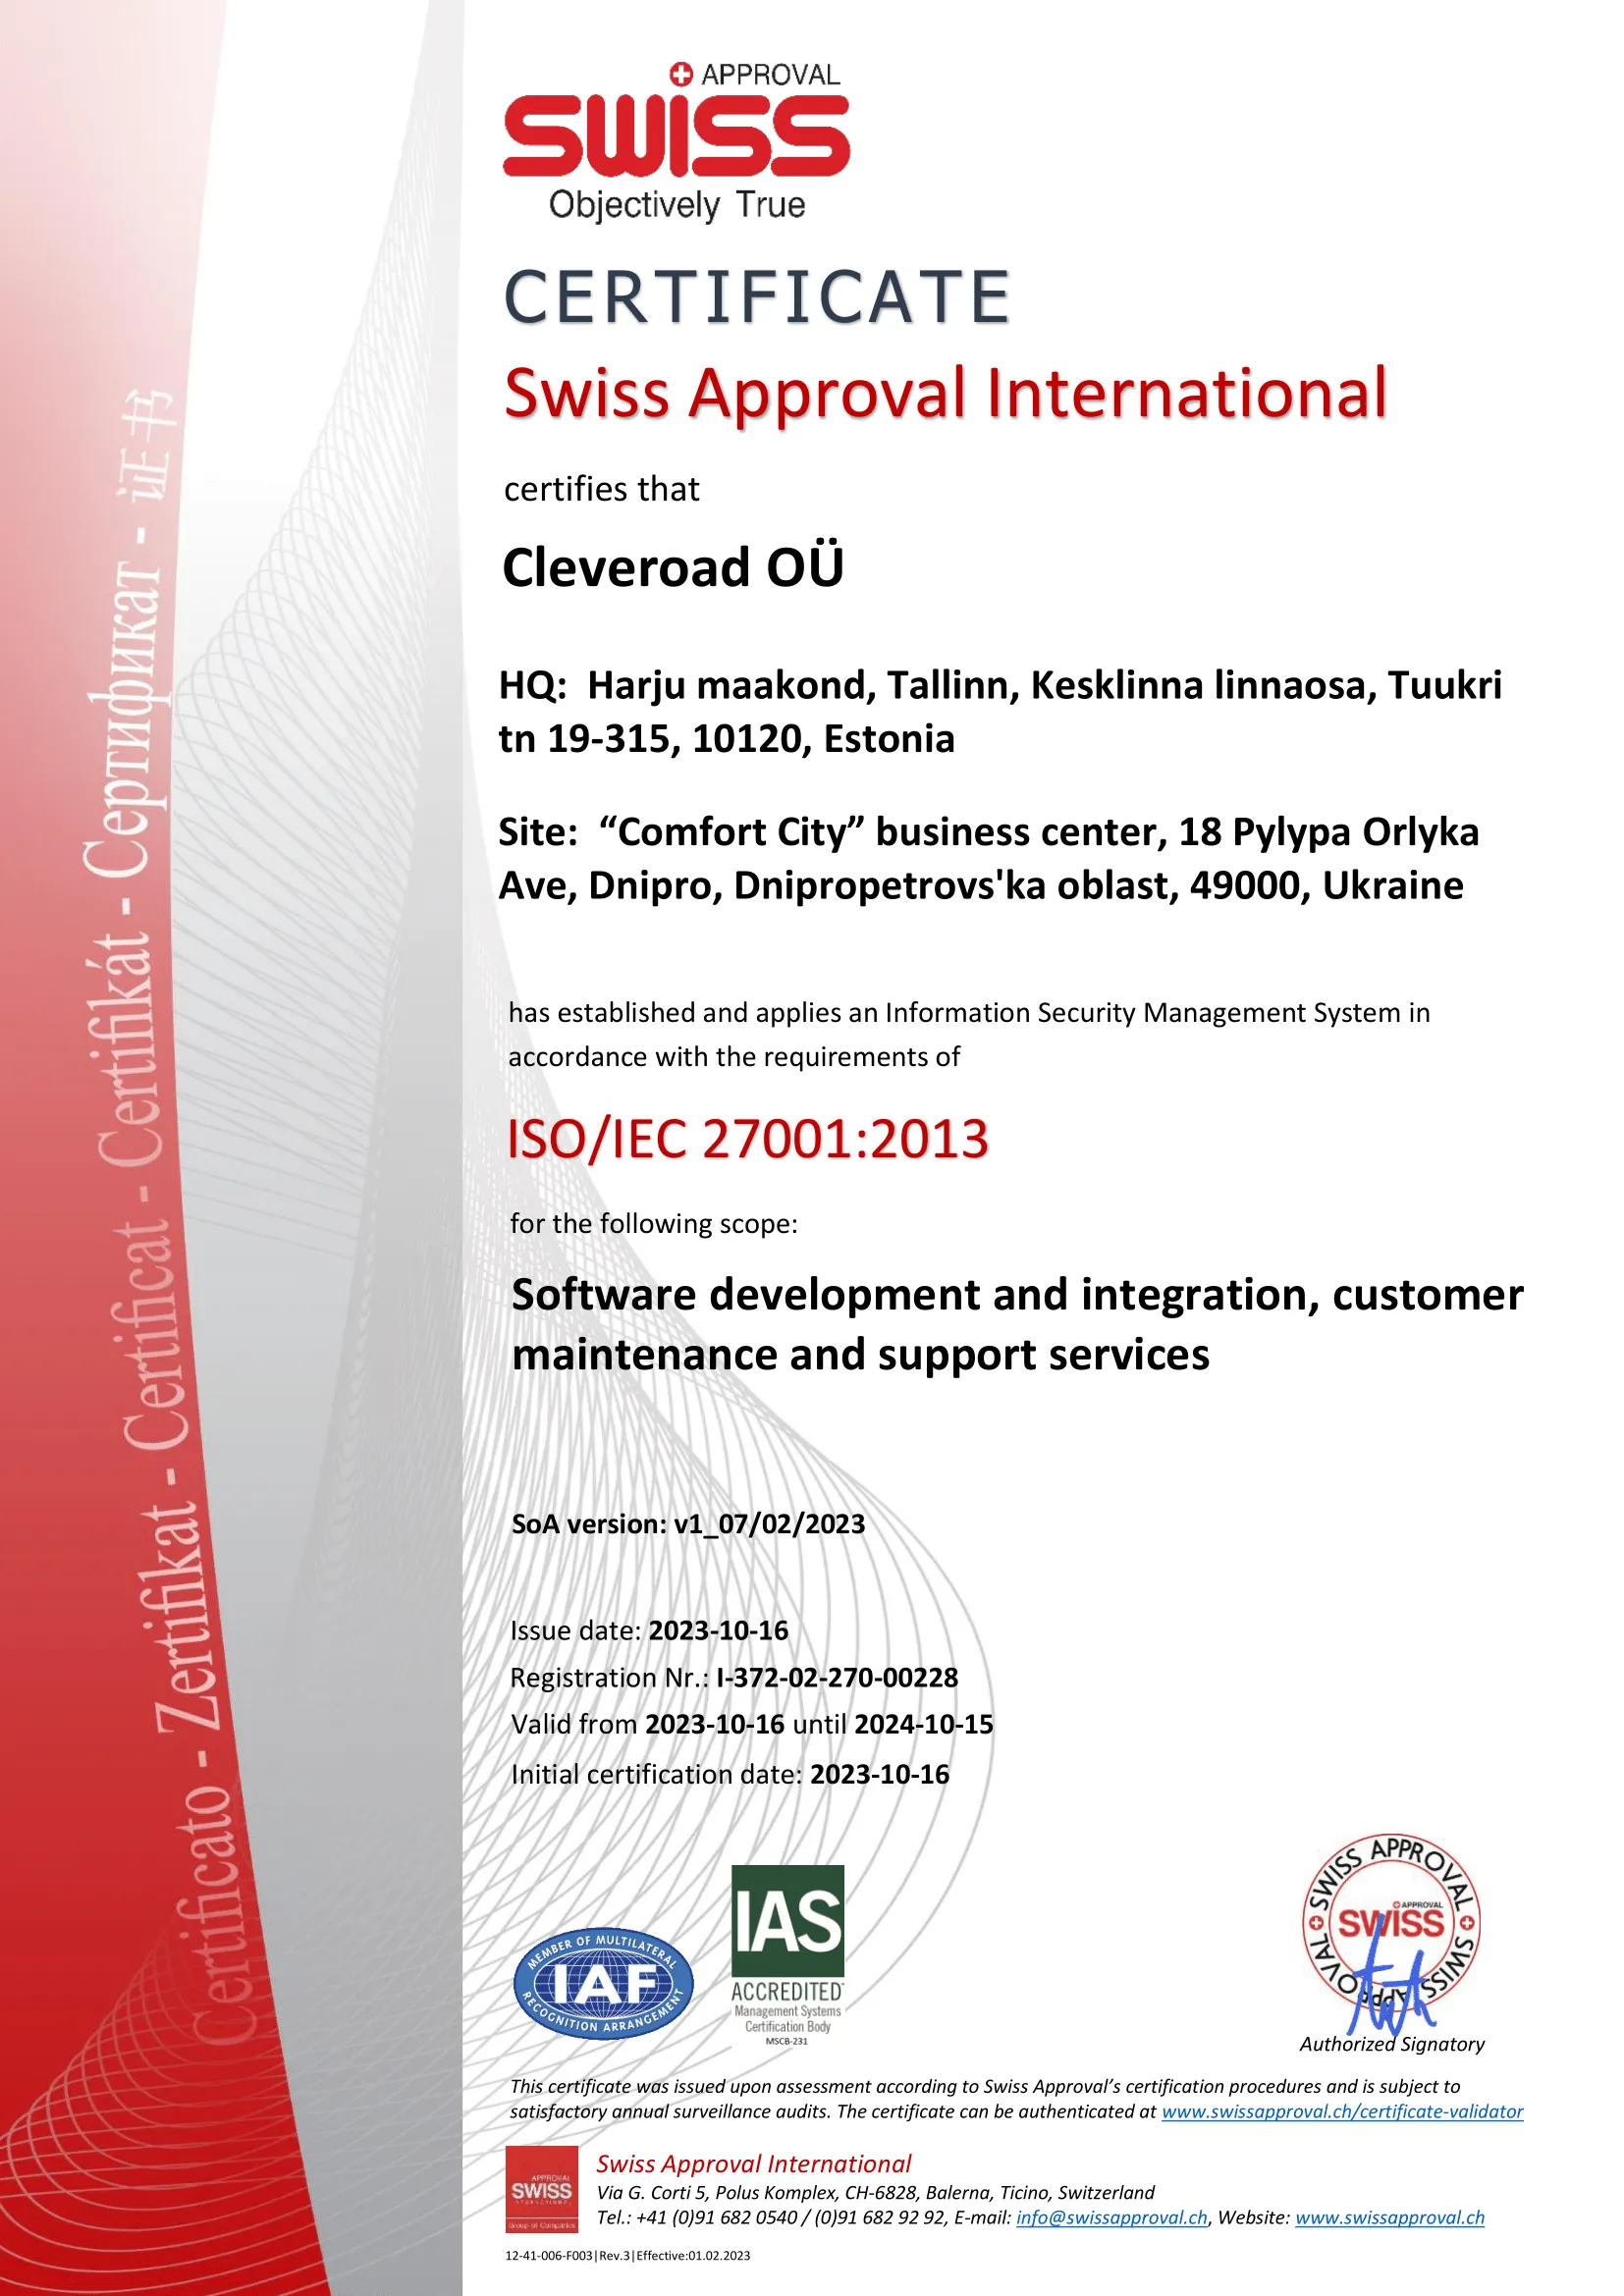 Cleveroad received the certifcation for ISO/IEC 27001:2013 Information Security Management Standard